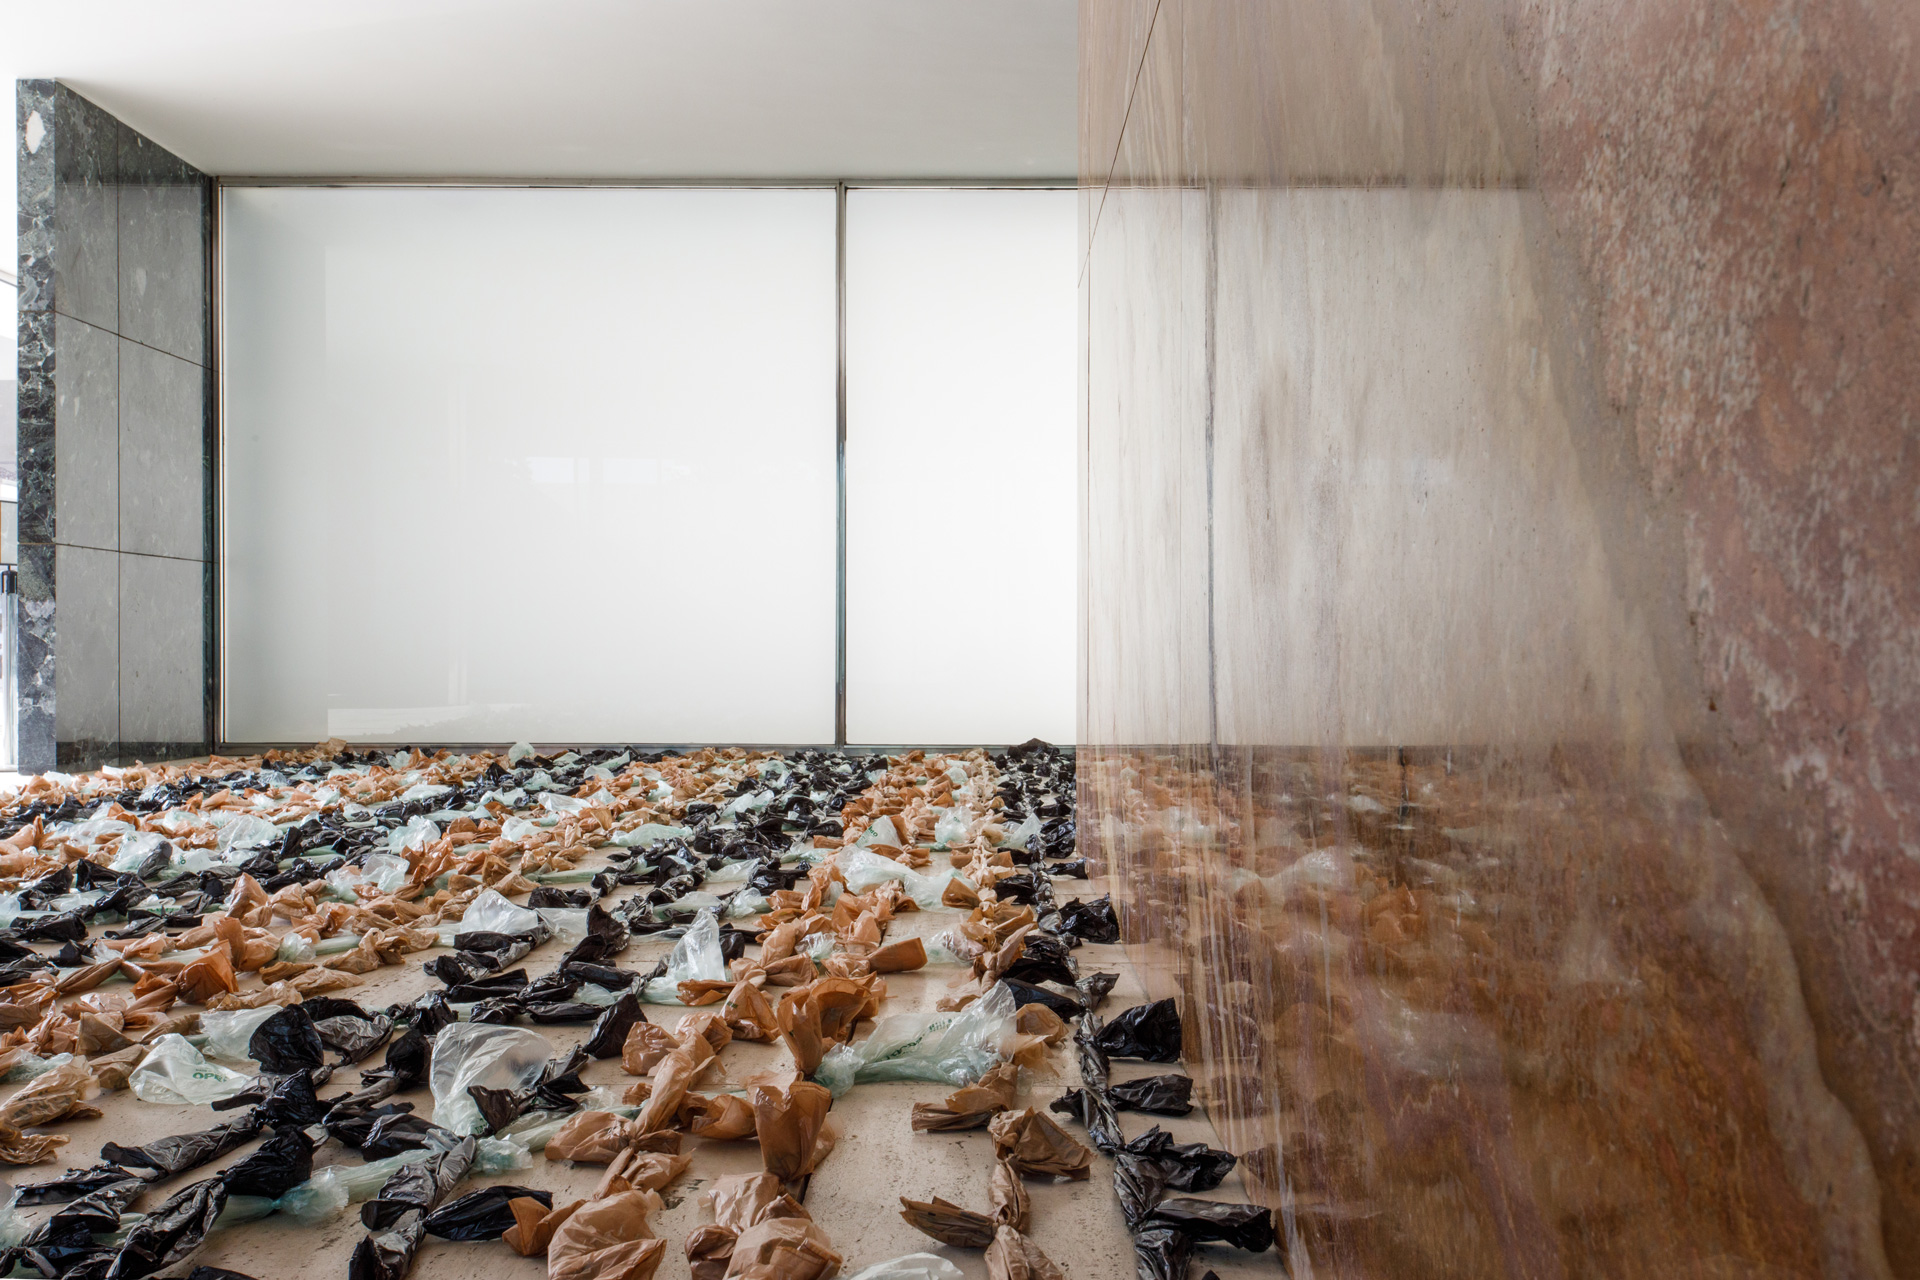 Interior shot of Mies van der Rohe Pavilion in Barcelona. A red onyx wall stretches away from the viewer, filling the right half of the shot. The floor is covered by strands of disposable shopping bags.